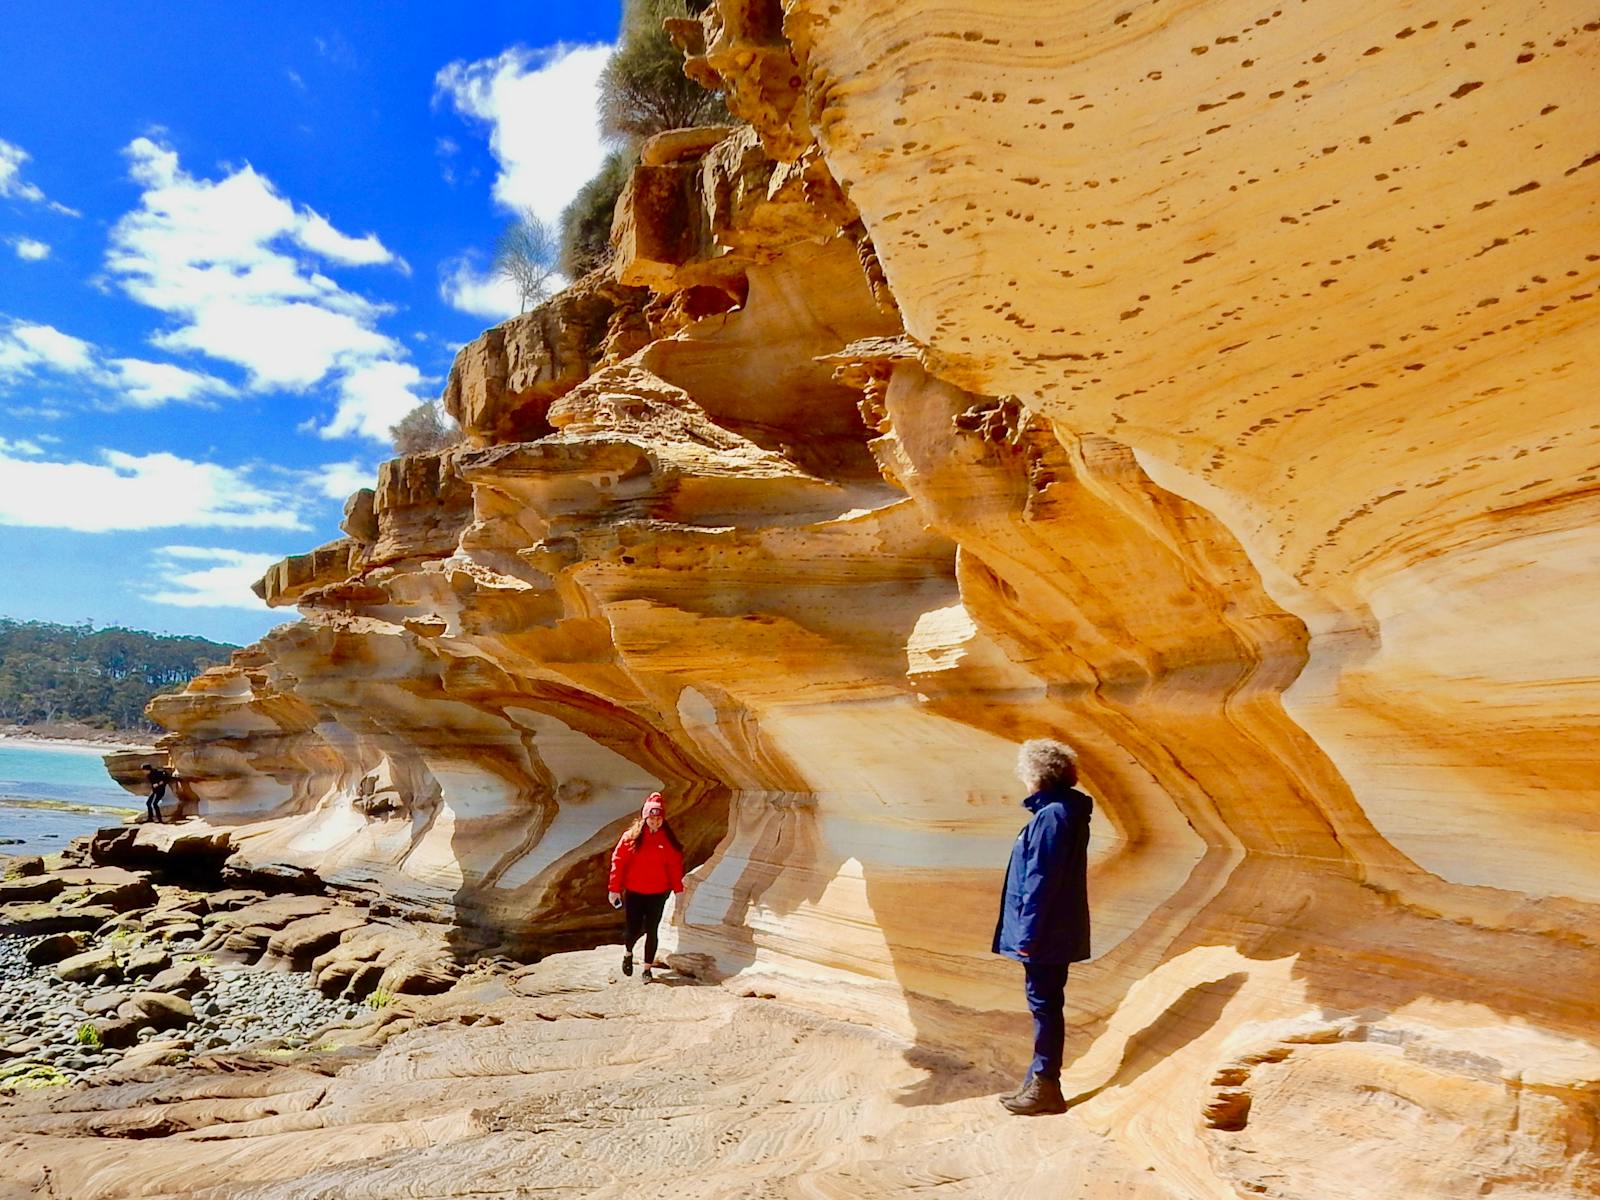 Explore the amazing Painted Cliffs, Fossil Cliffs and convict ruins